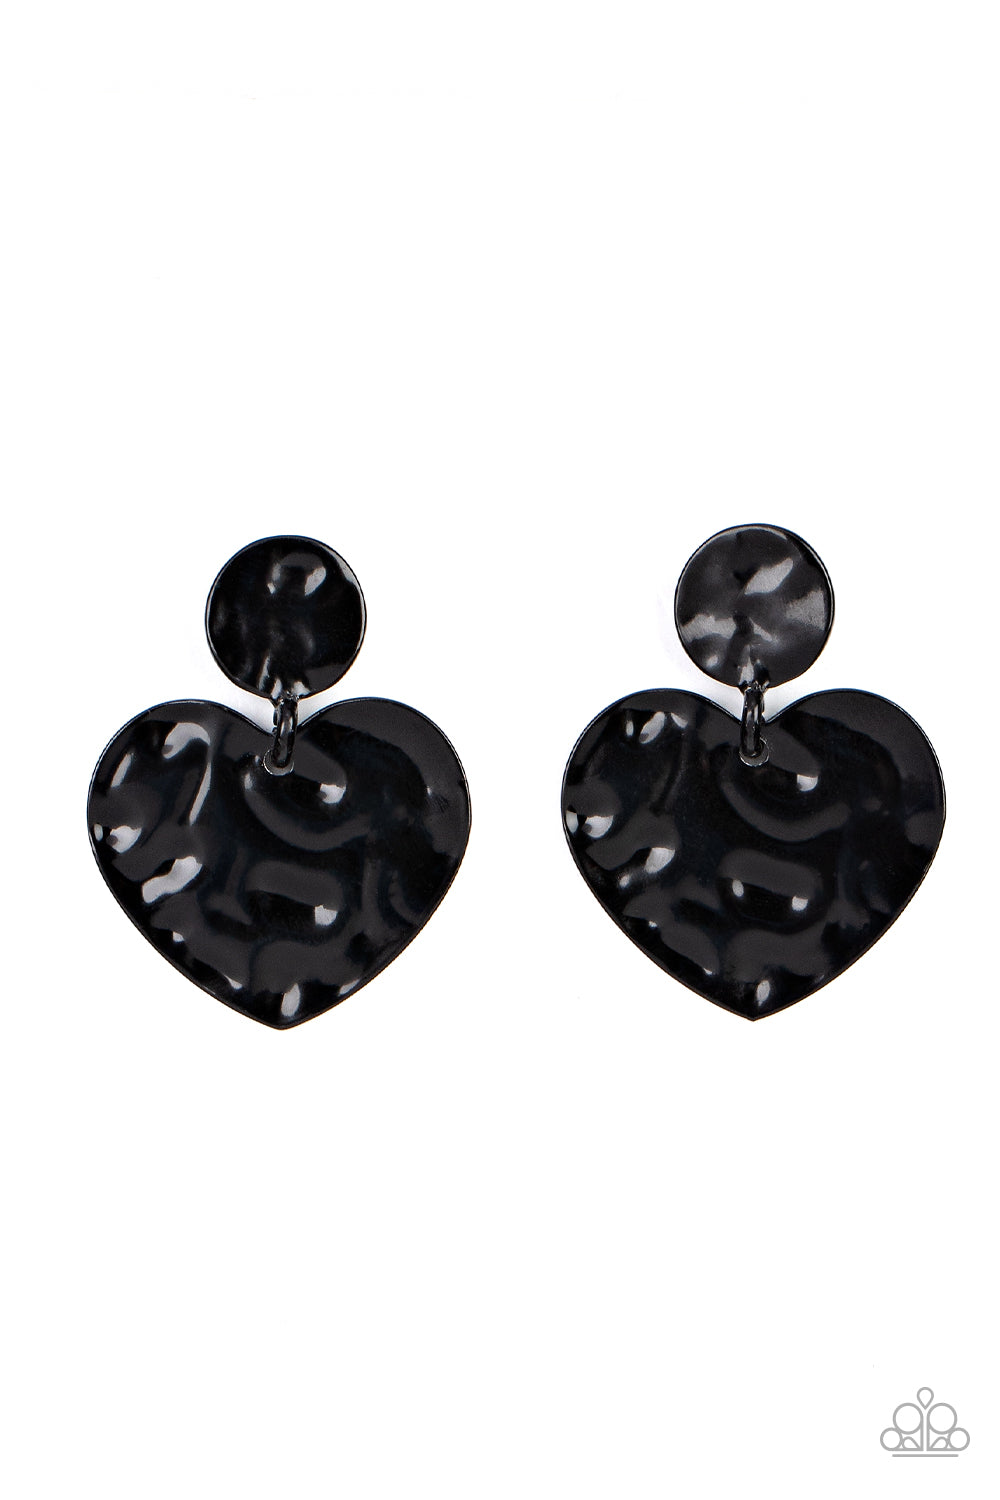 Just a Little Crush Black Heart Earring - Paparazzi Accessories  Painted in a glossy black finish, a hammered disc gives way to a hammered heart frame for a flirtatious fashion. Earring attaches to a standard post fitting.  All Paparazzi Accessories are lead free and nickel free!  Sold as one pair of post earrings.